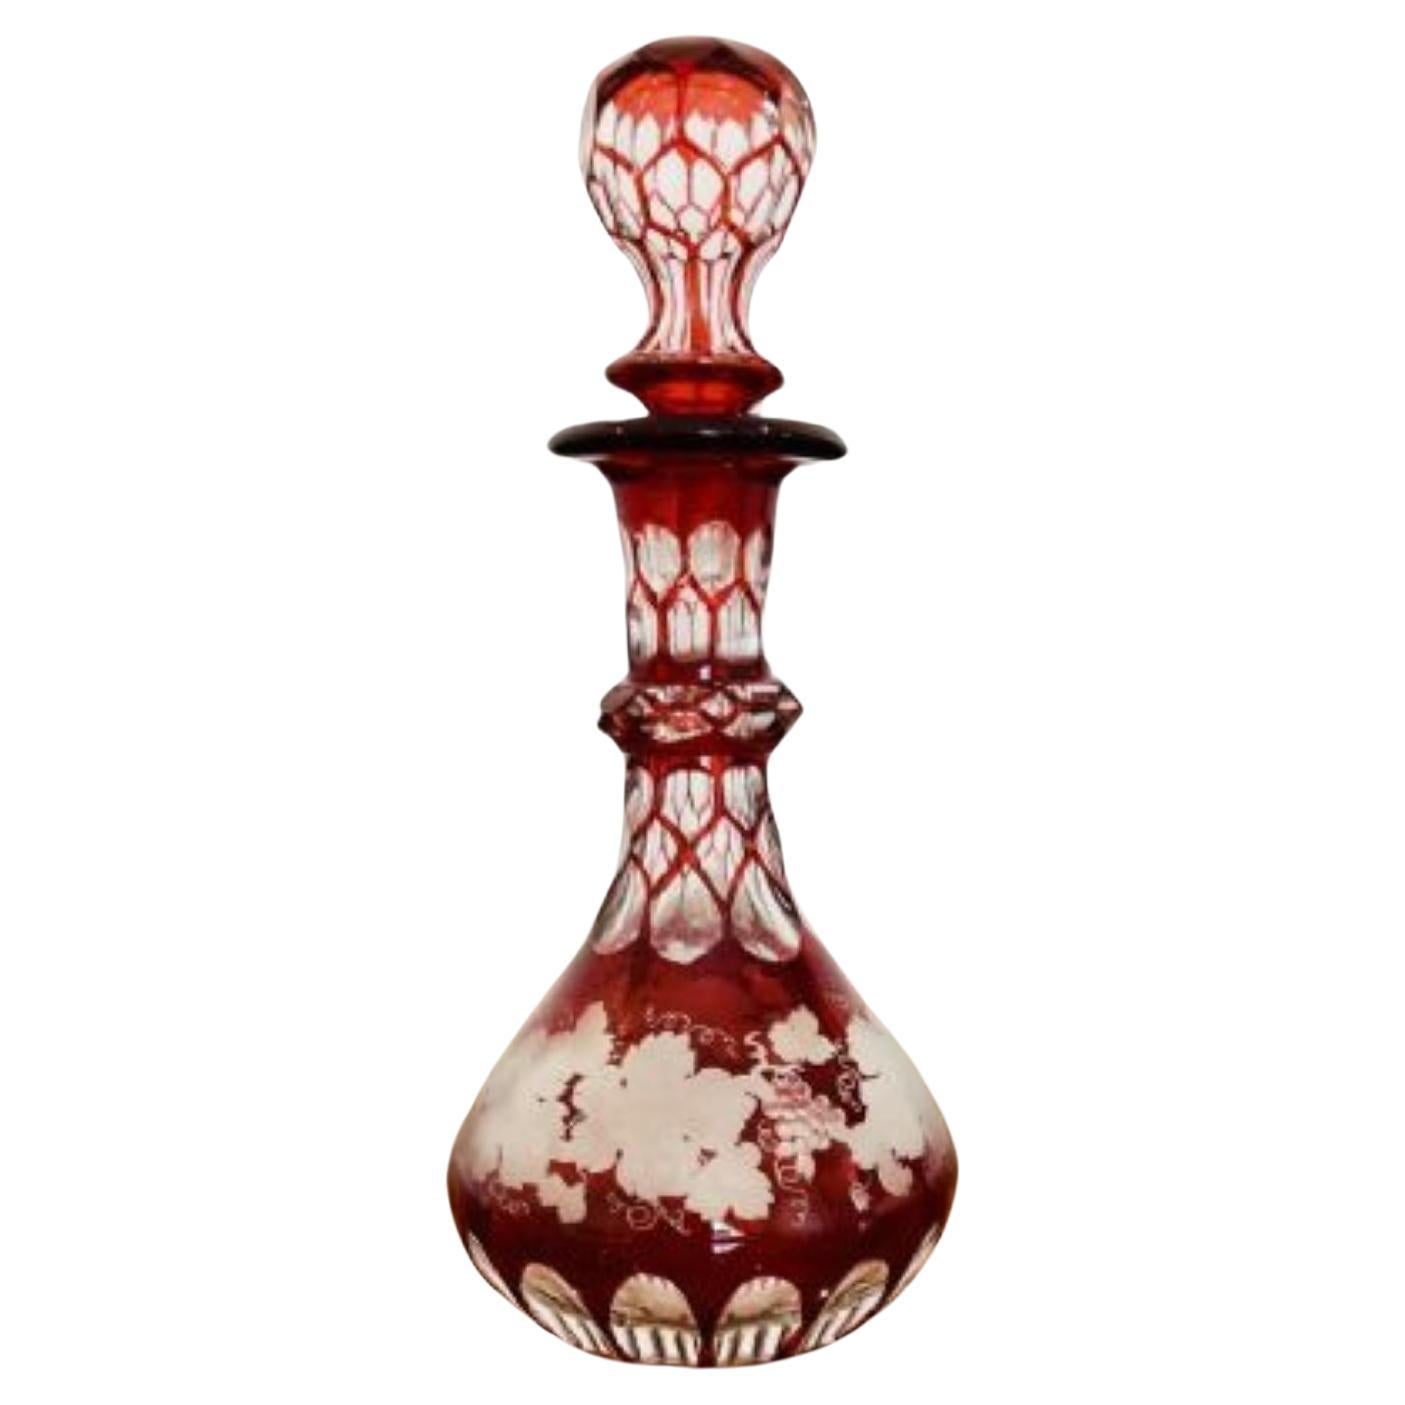 Quality antique Victorian glass spirit perfume bottle and stopper For Sale